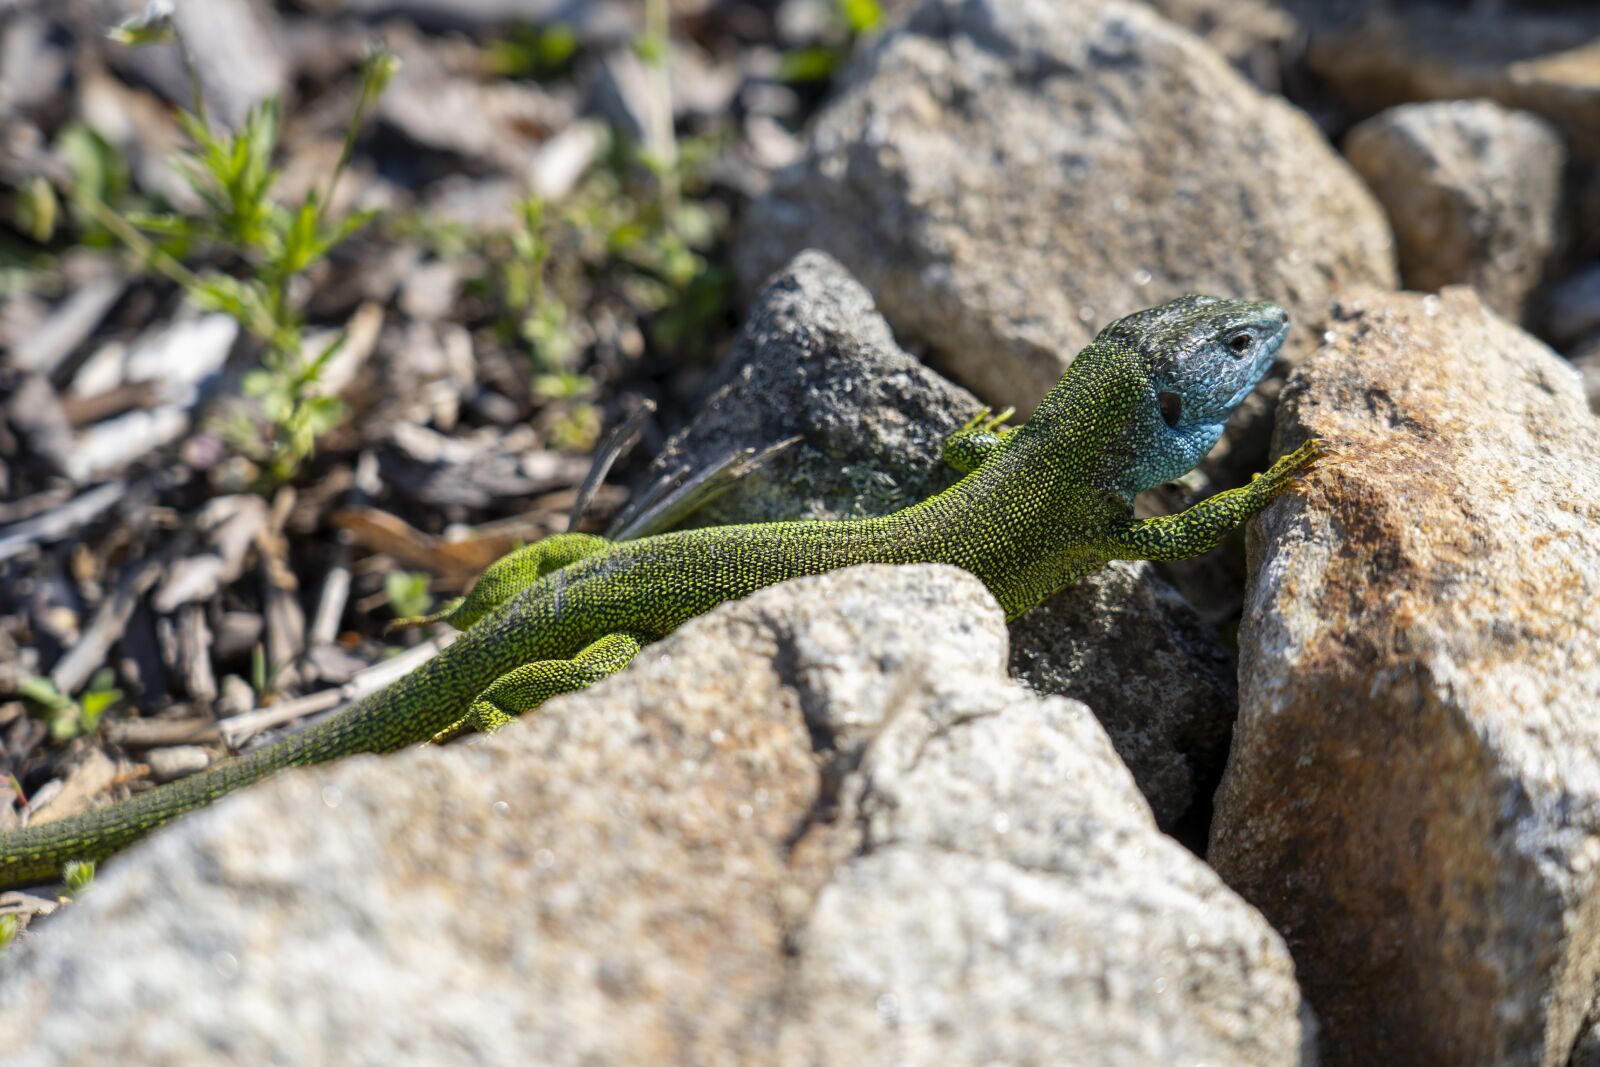 Sony a7 III sample photo. The lizard, reptile, nature photography